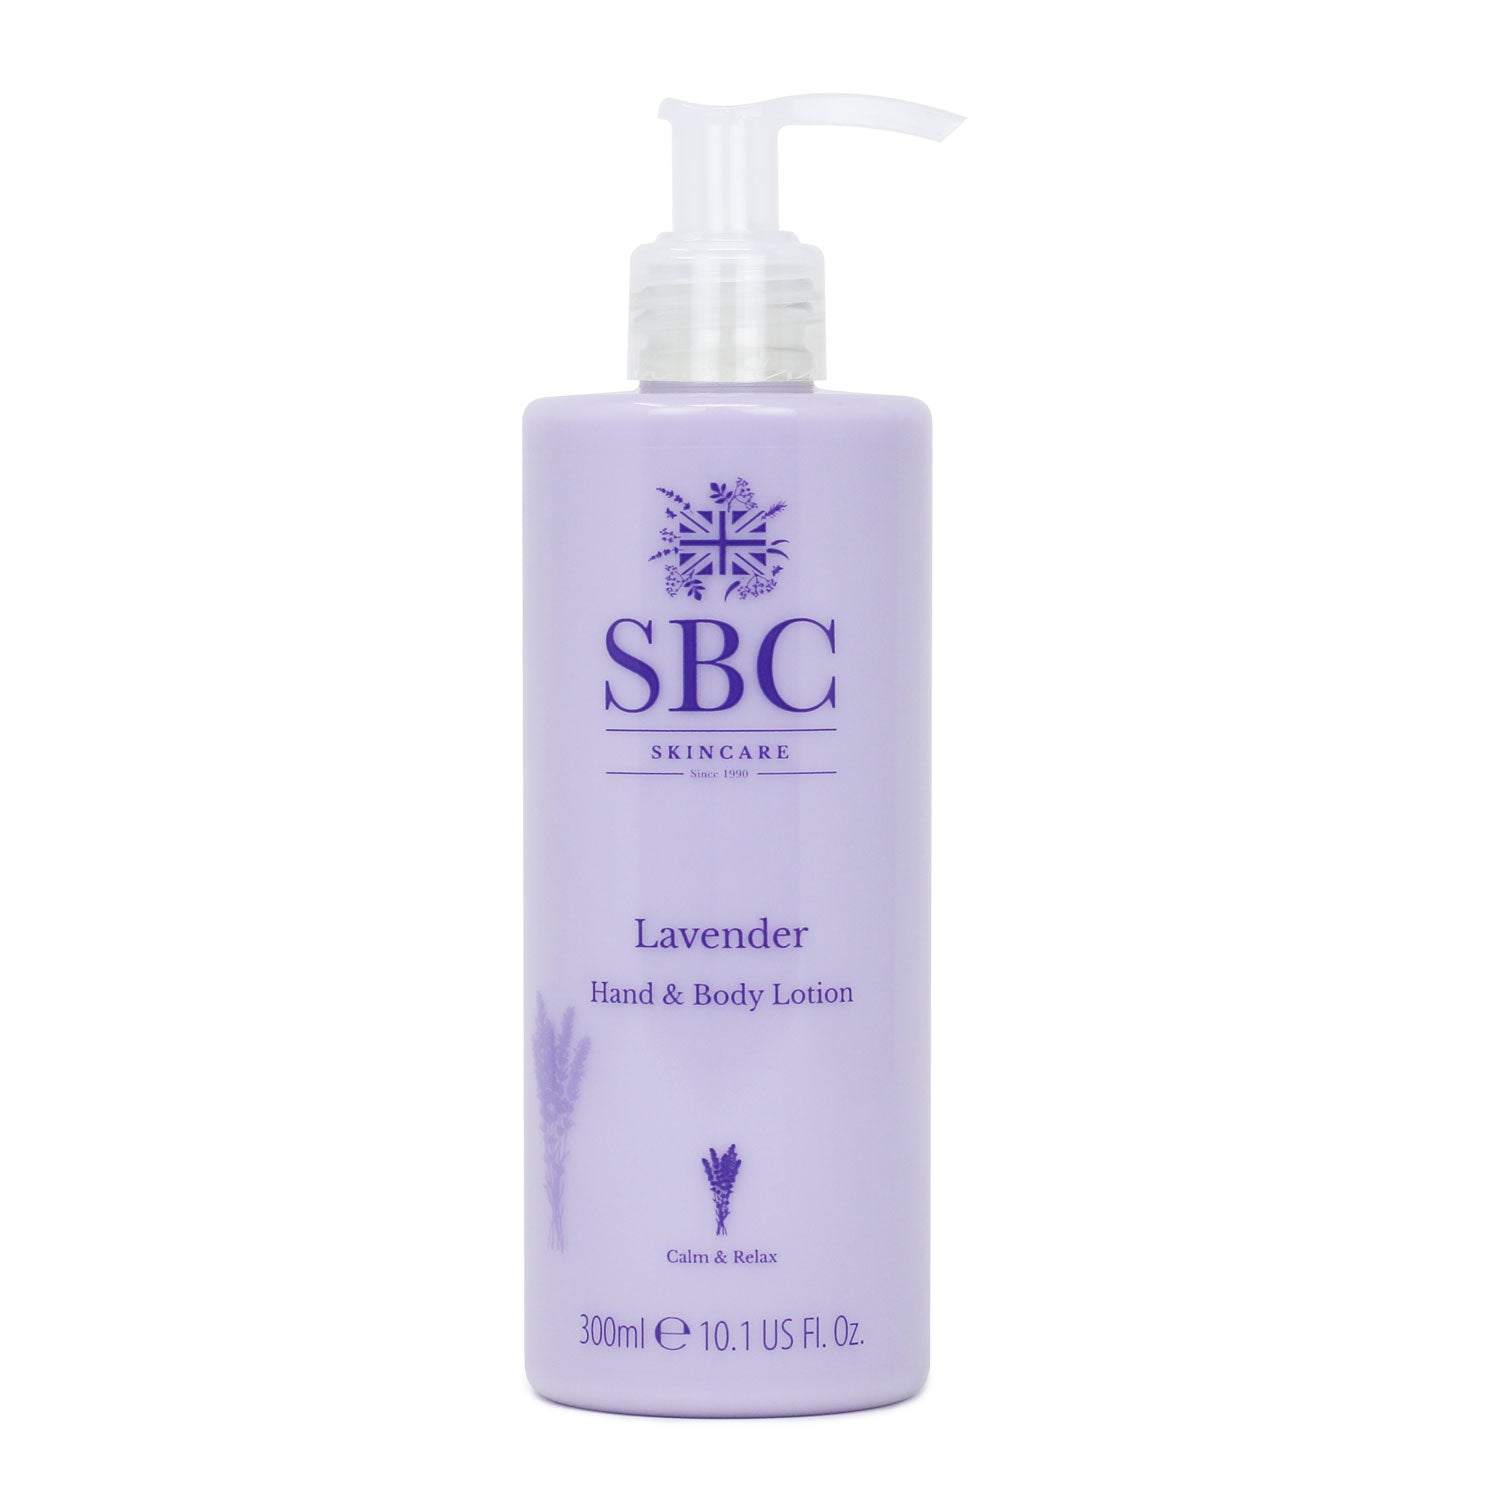 300ml Lavender Hand & Body Lotion on a white background